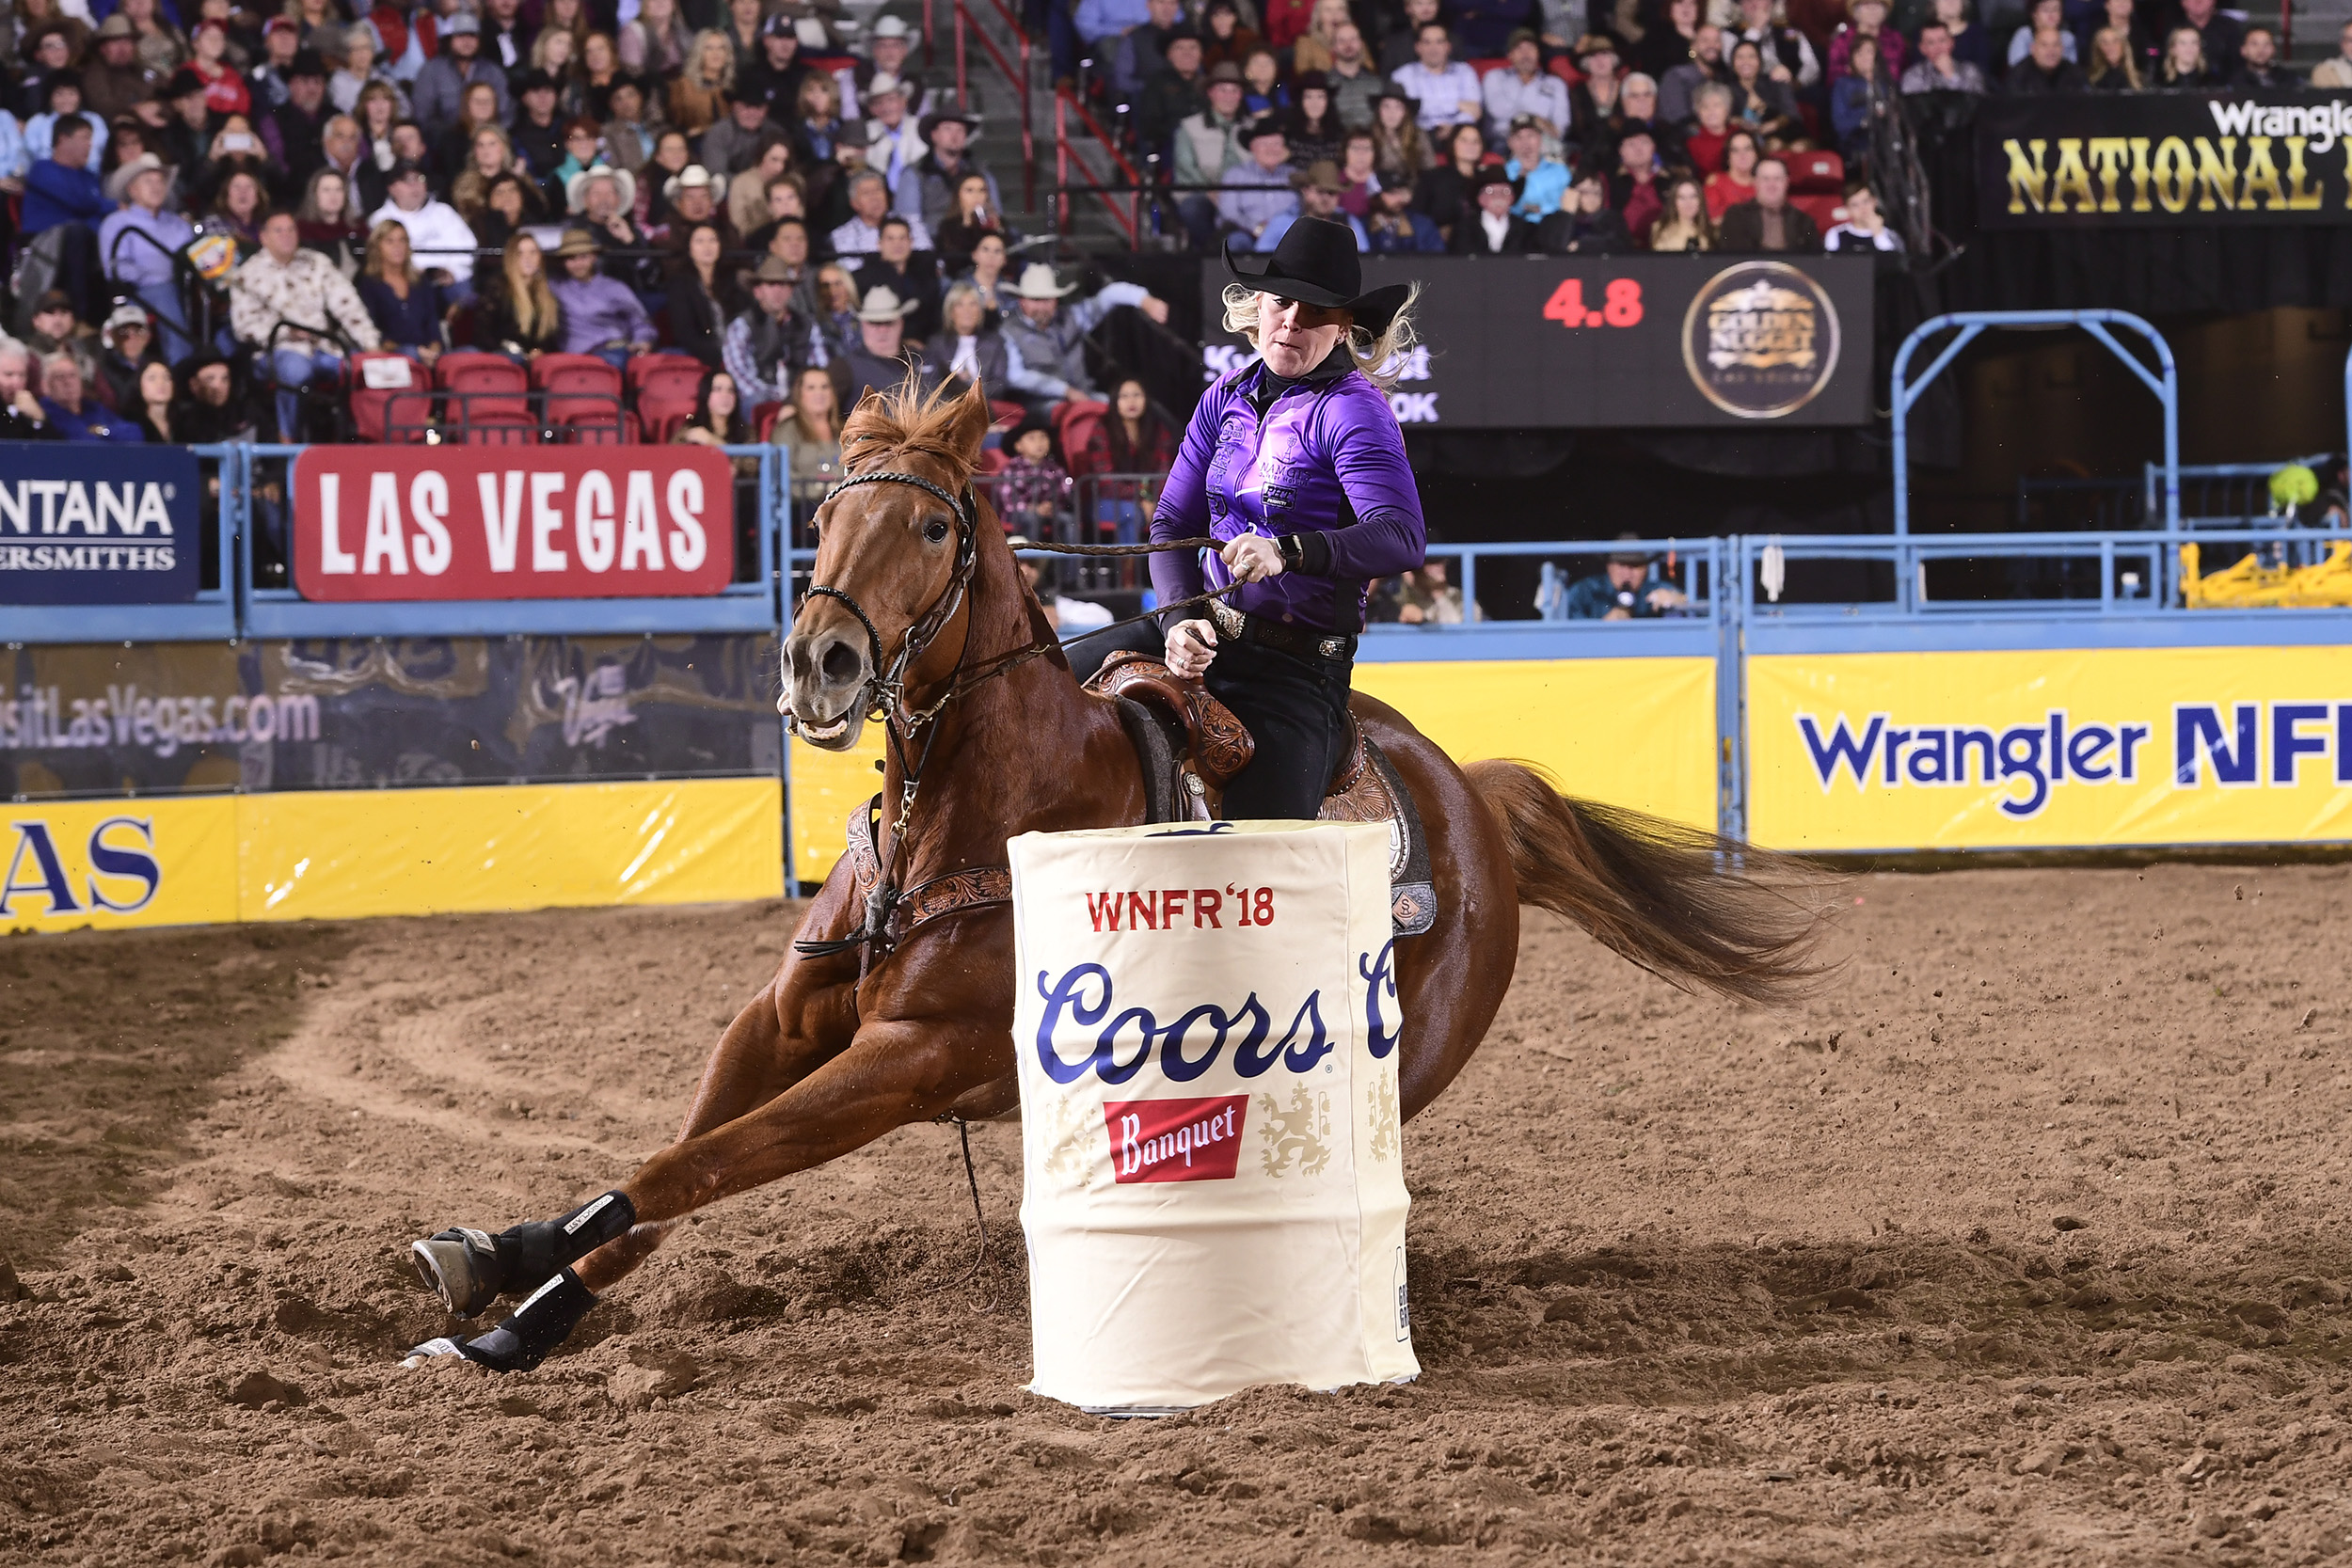 Kylie Weast and Reddy turn the second barrel en route to a 13.74-second run Wednesday to finish in a tie for fourth place in the seventh round of the National Finals Rodeo. (PRCA PRORODEO PHOTO BY JAMES PHIFER)